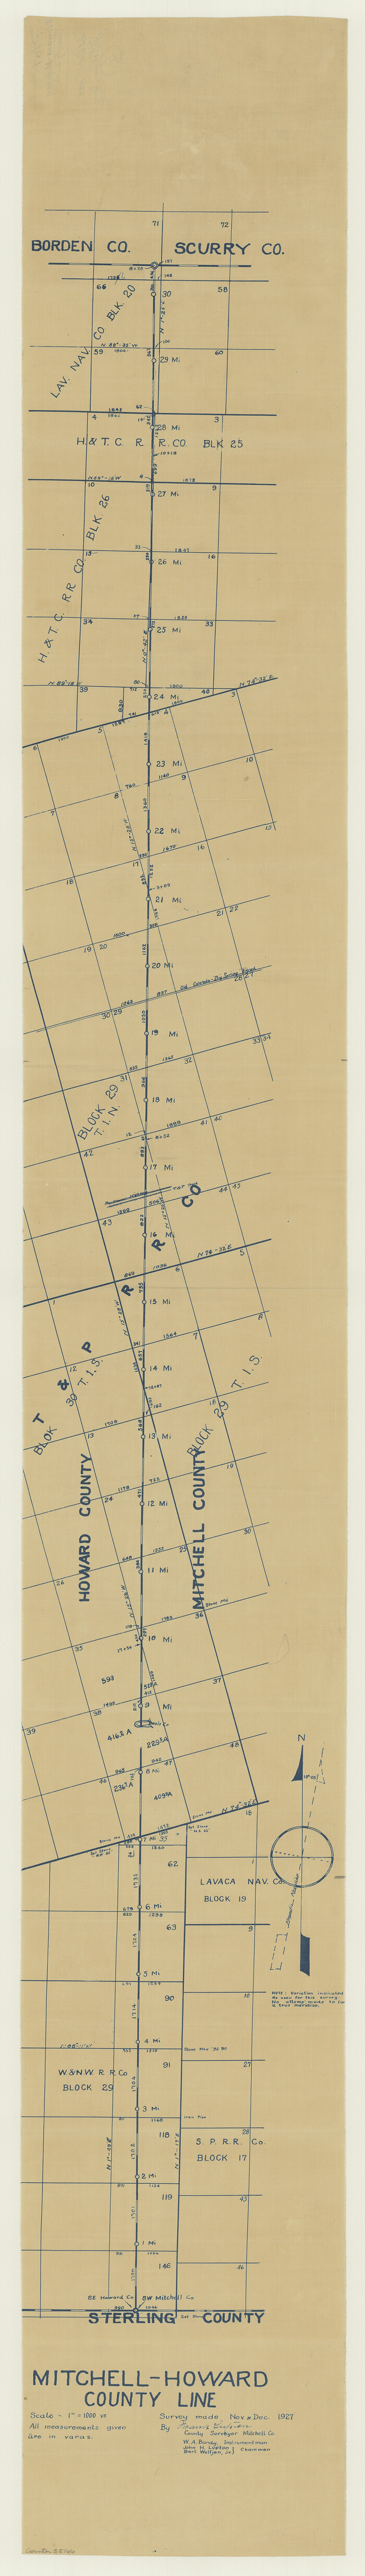 55166, Howard County Boundary File 4a, General Map Collection